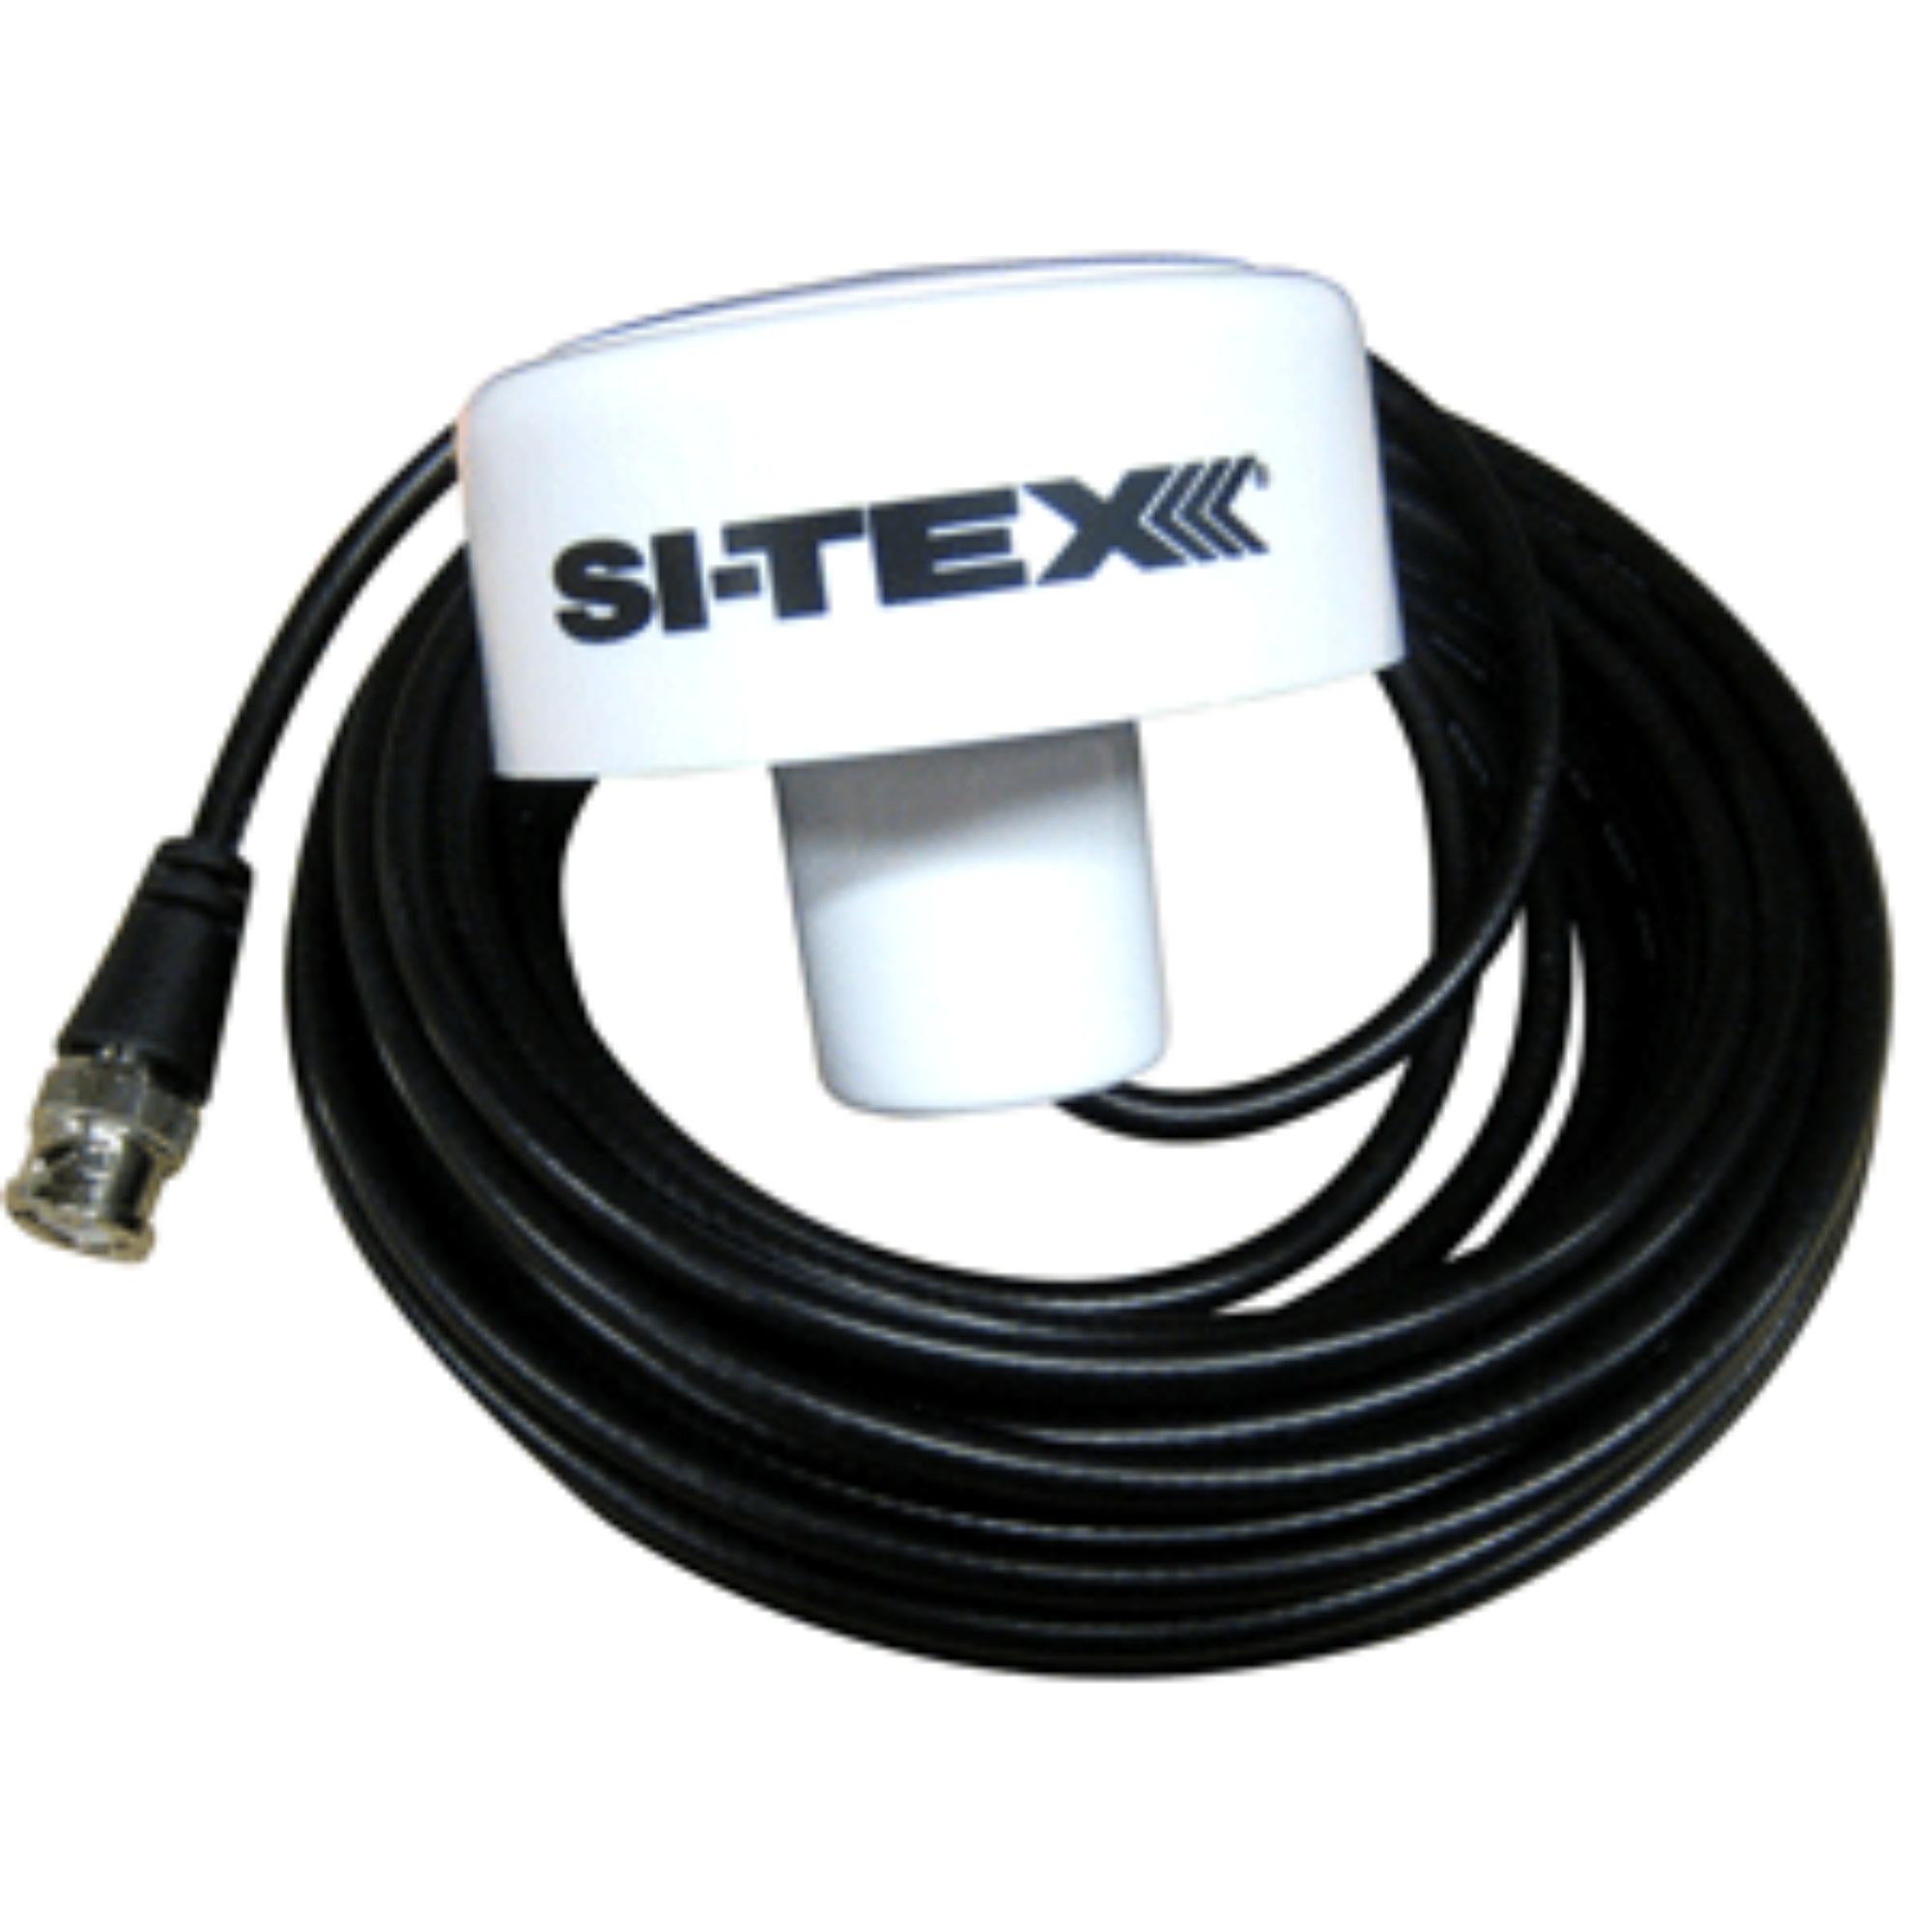 SI-TEX SVS Series Replacement GPS Antenna w/10M Cable [GA-88] - image 1 of 2